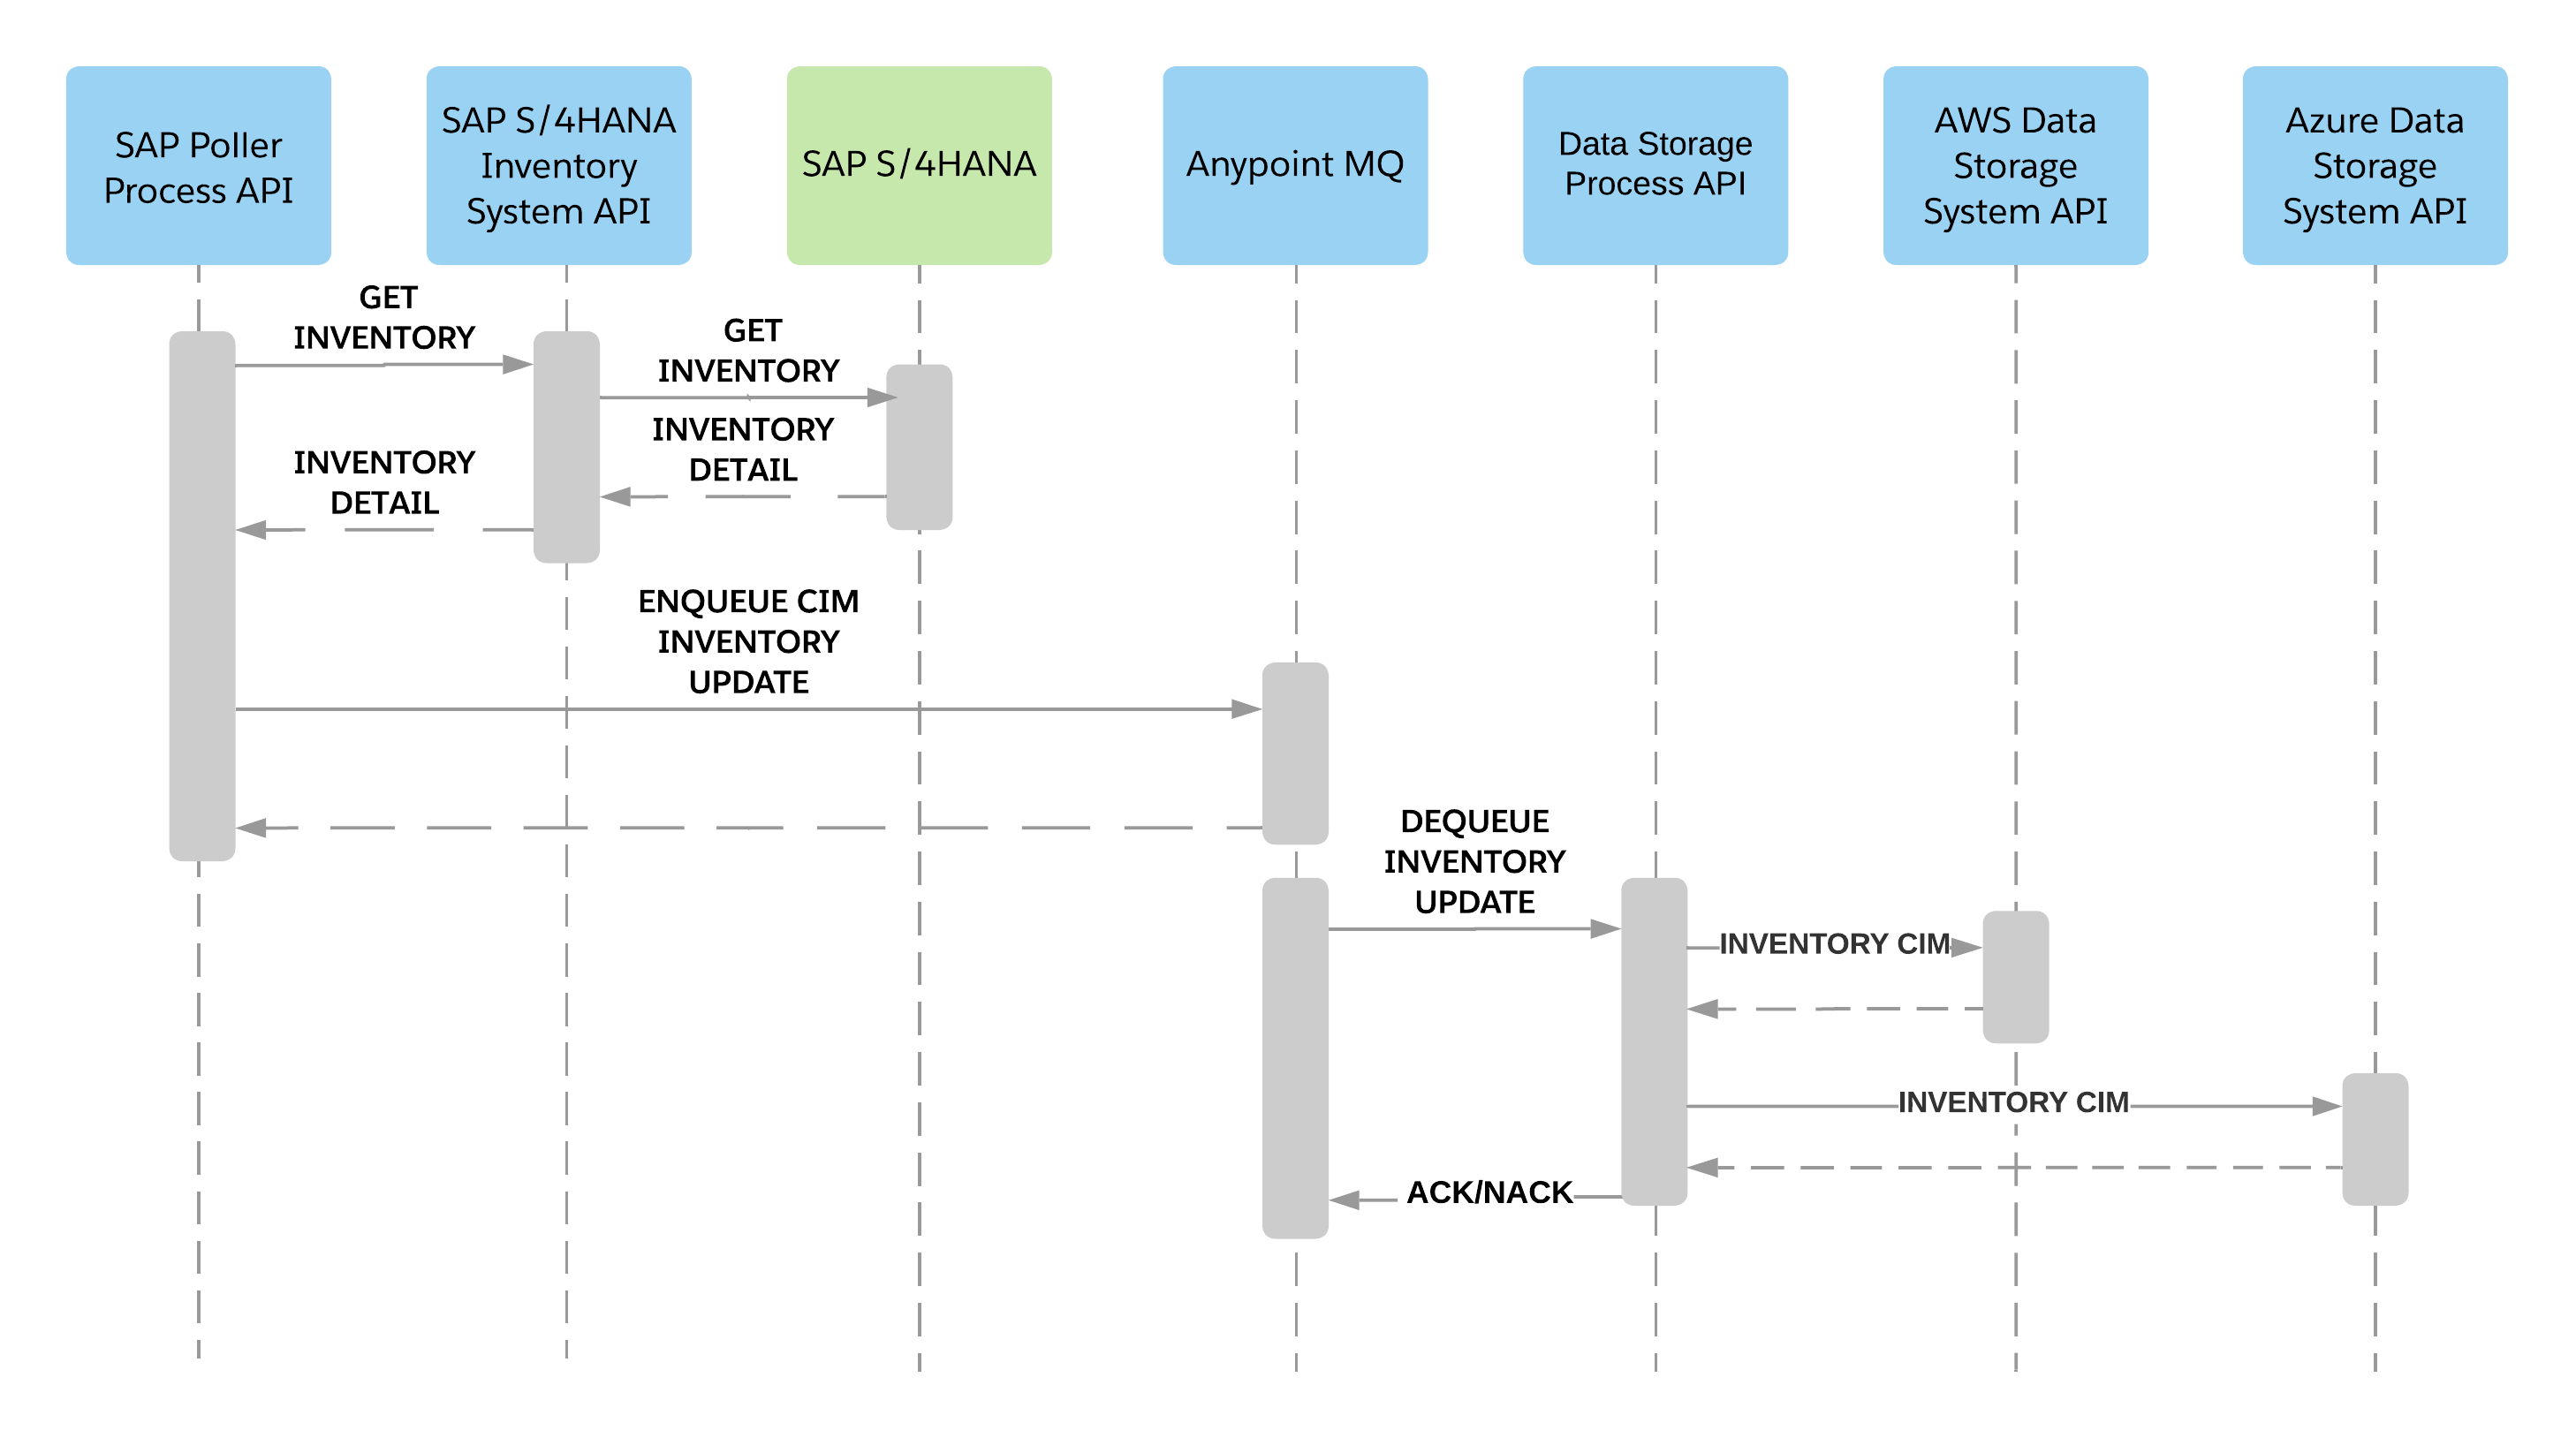 sap-datalakes-inventory-sequence-diagram.png